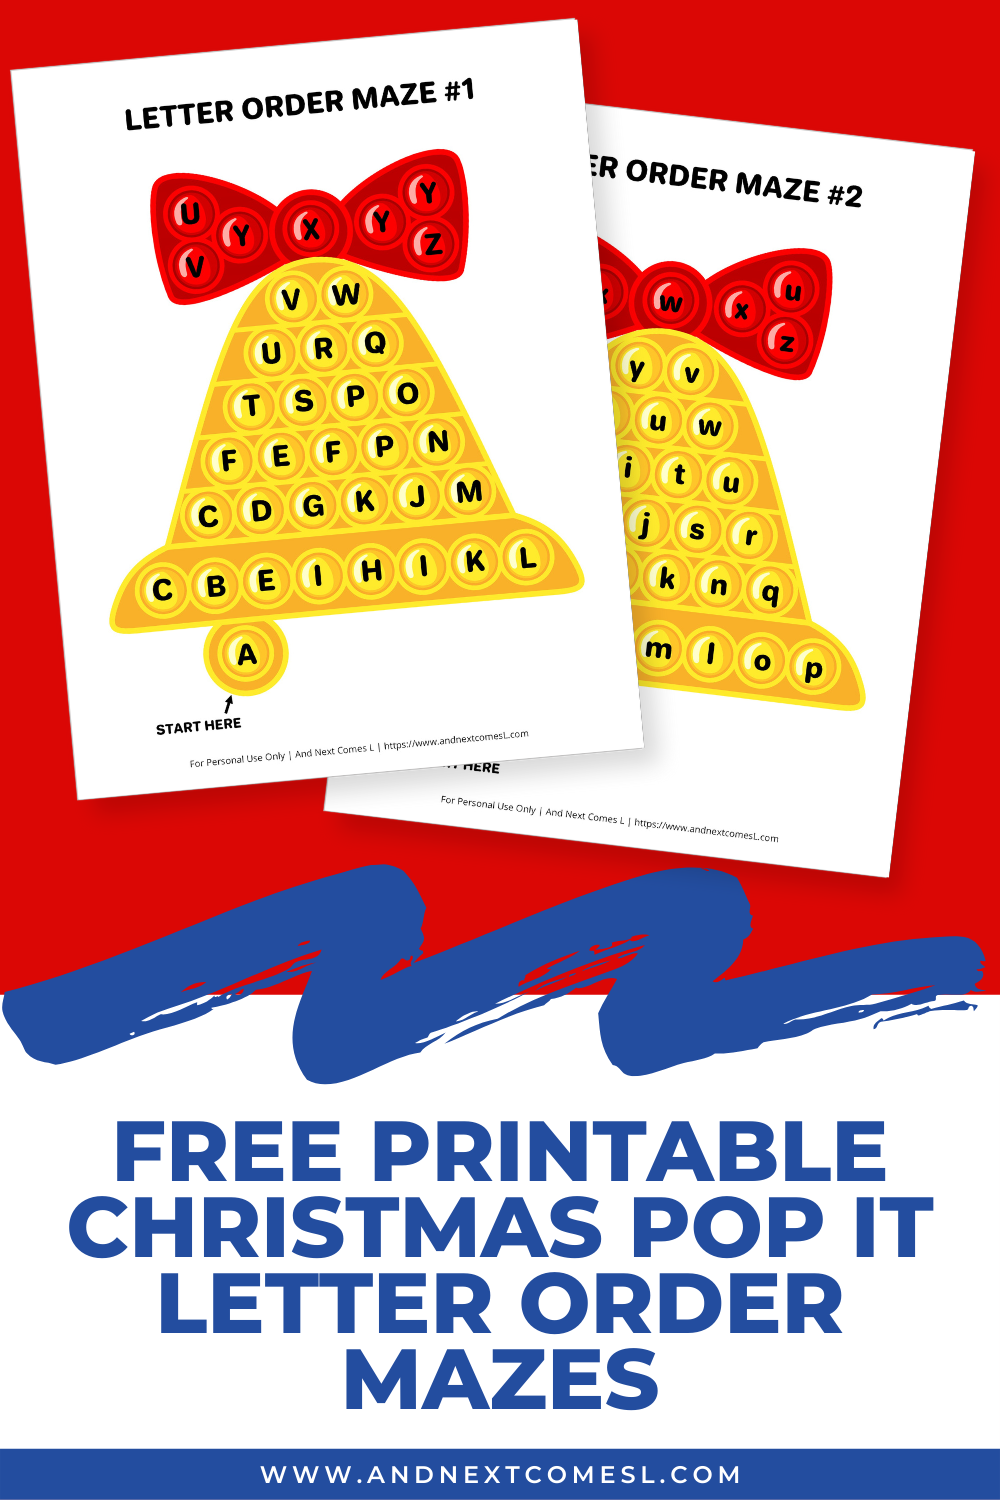 Free printable Christmas pop it letter order mazes - a fun Christmas alphabet activity for kids!